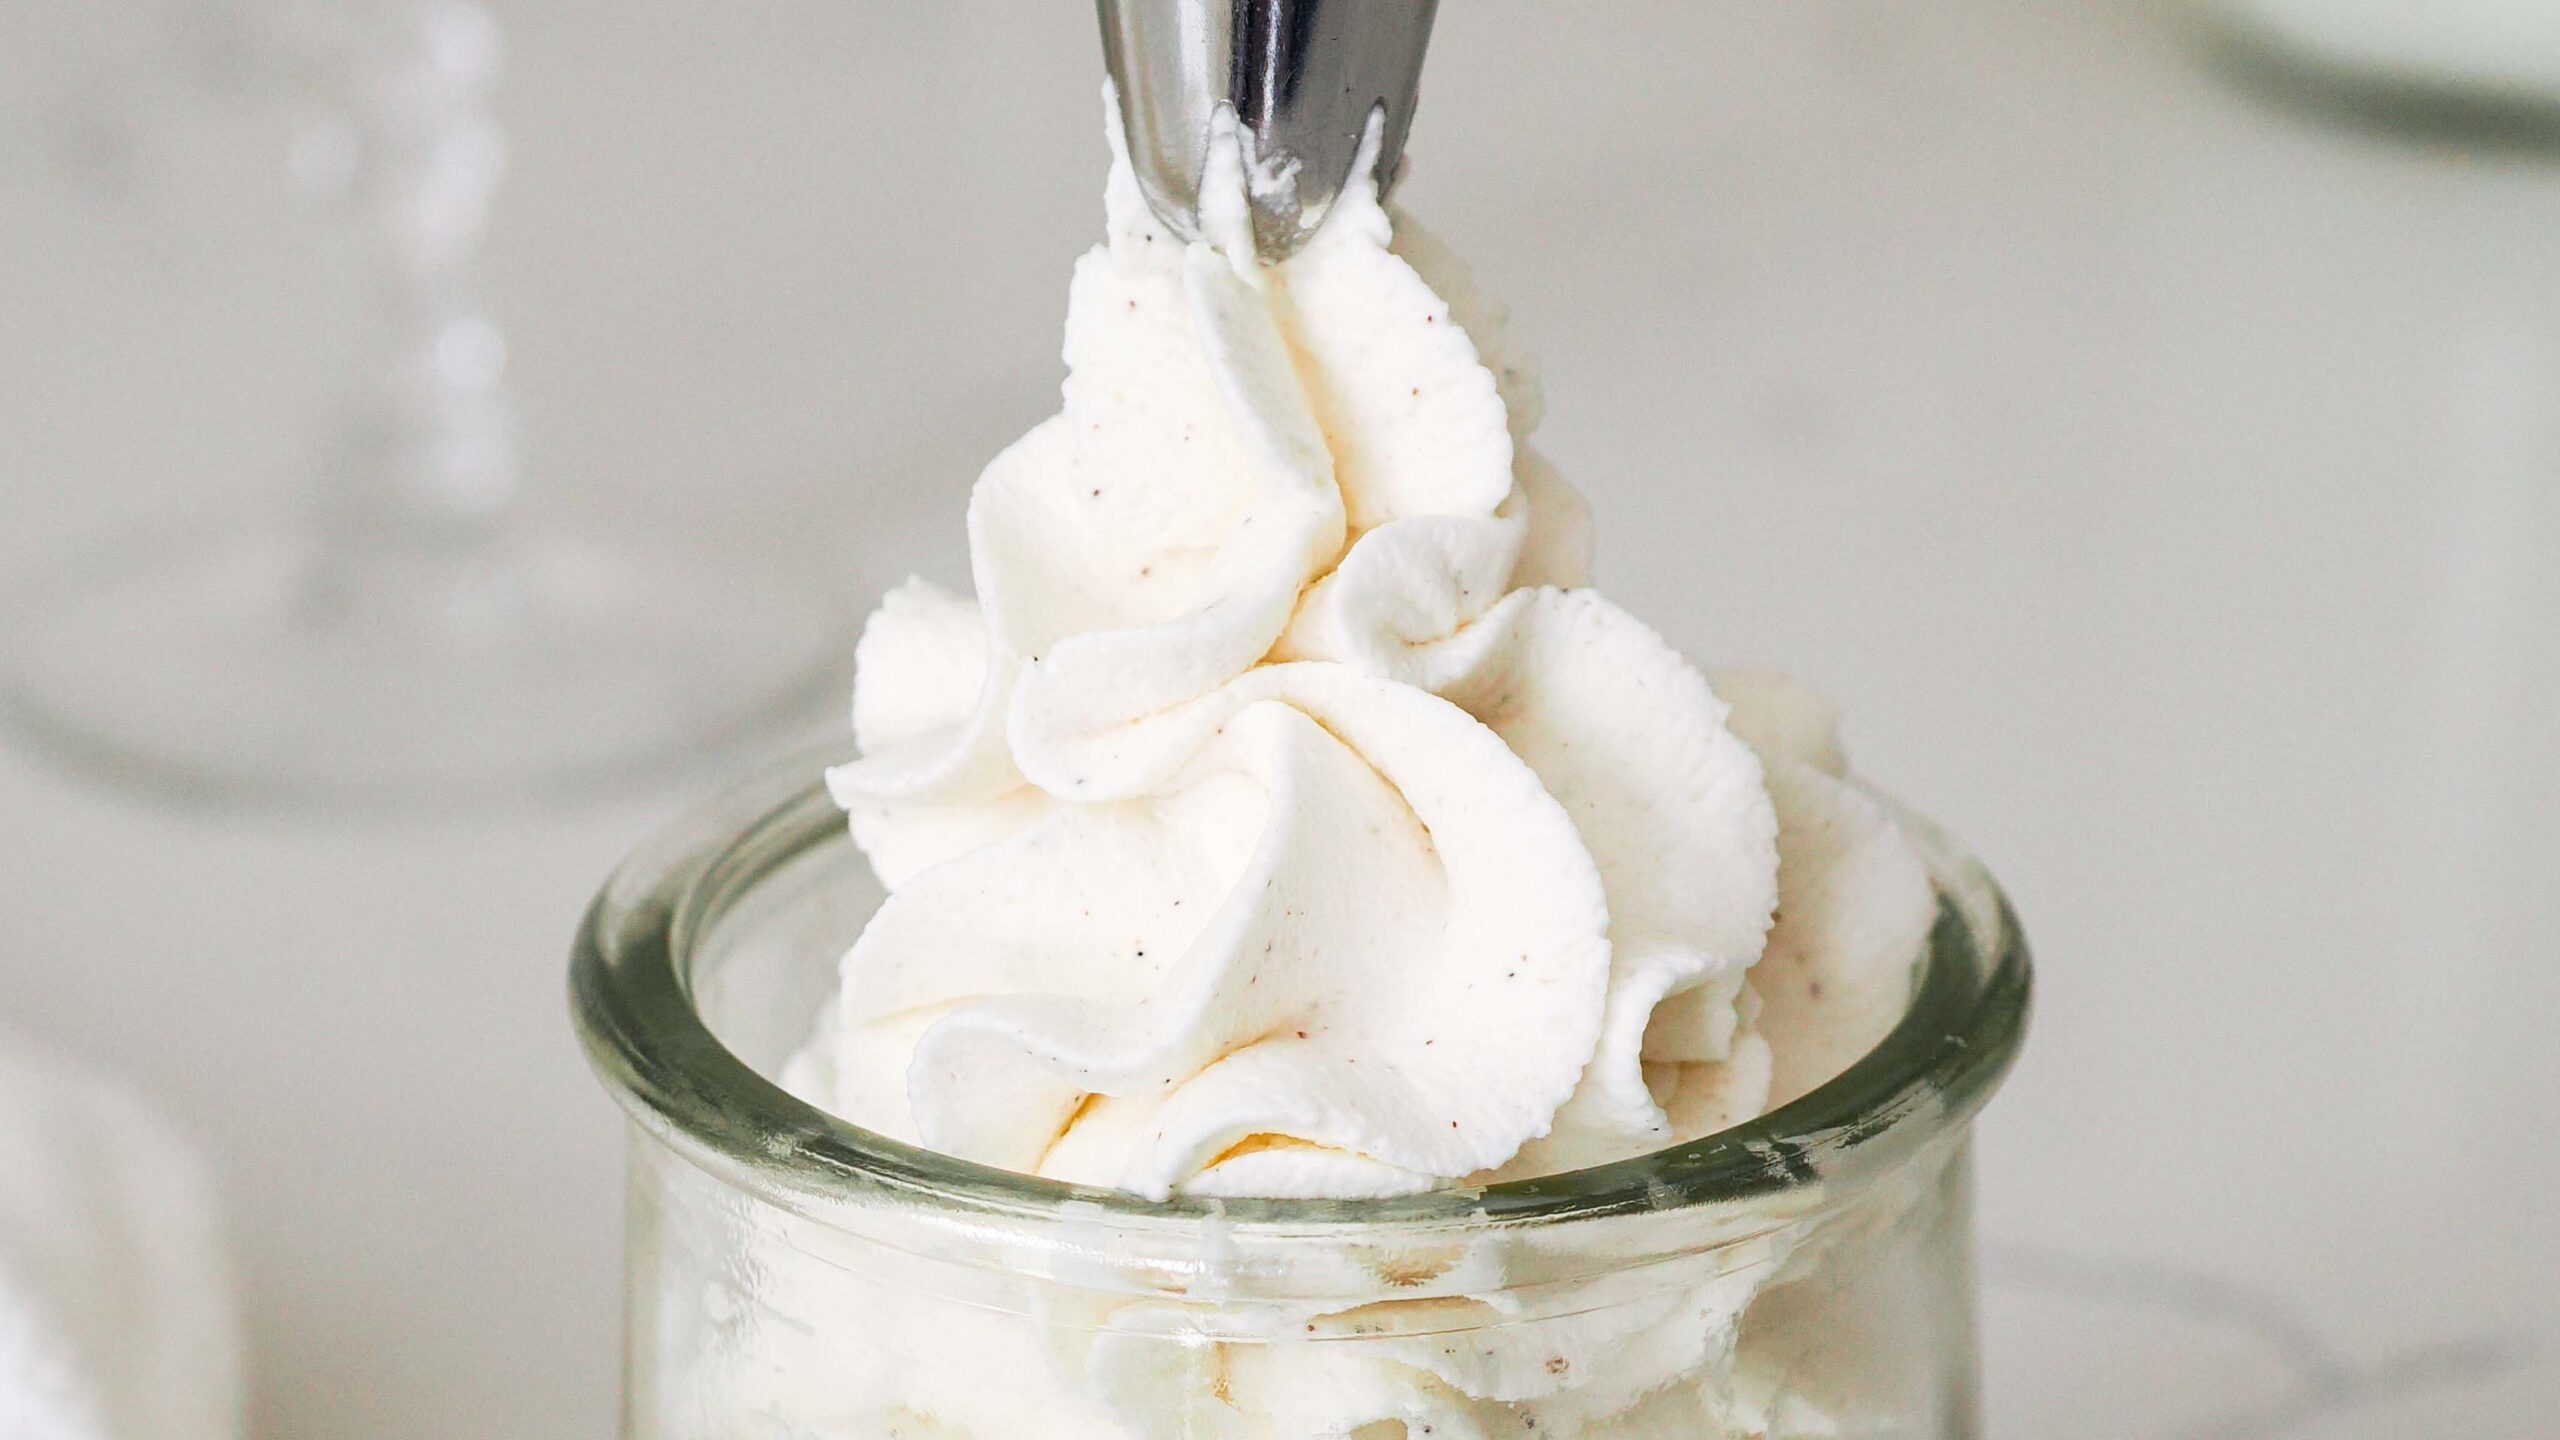 A piping tip pipes a swirl of whipped cream with vanilla bean speckles.